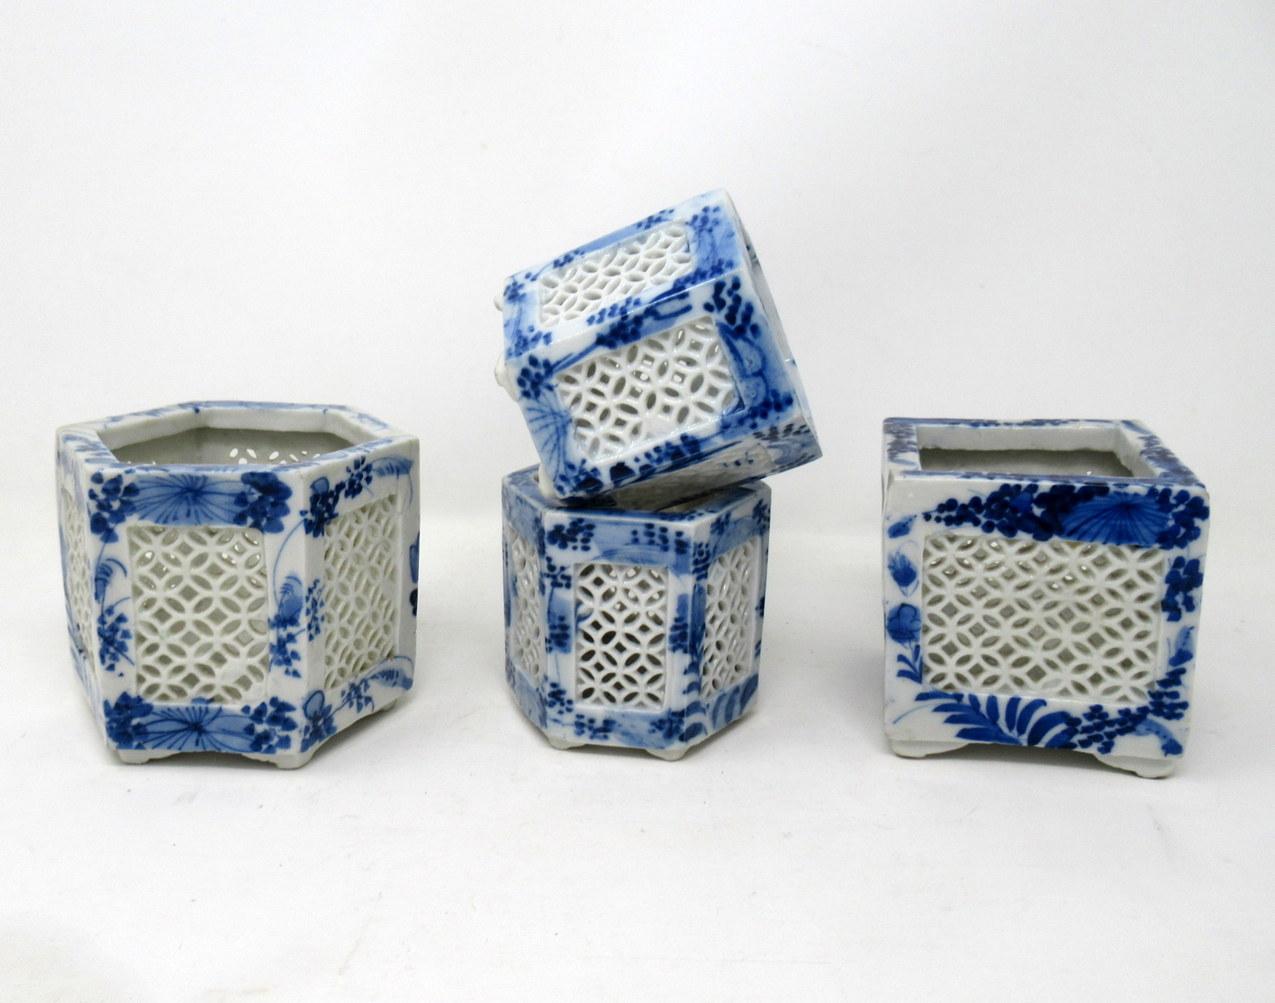 Stylish assembled set of four hand painted Chinese Export reticulated pierced blue and white porcelain vases of hexagonal and square outline, circa first half of the 20th century.

Each finely hand decorated on all outer panels depicting flowers